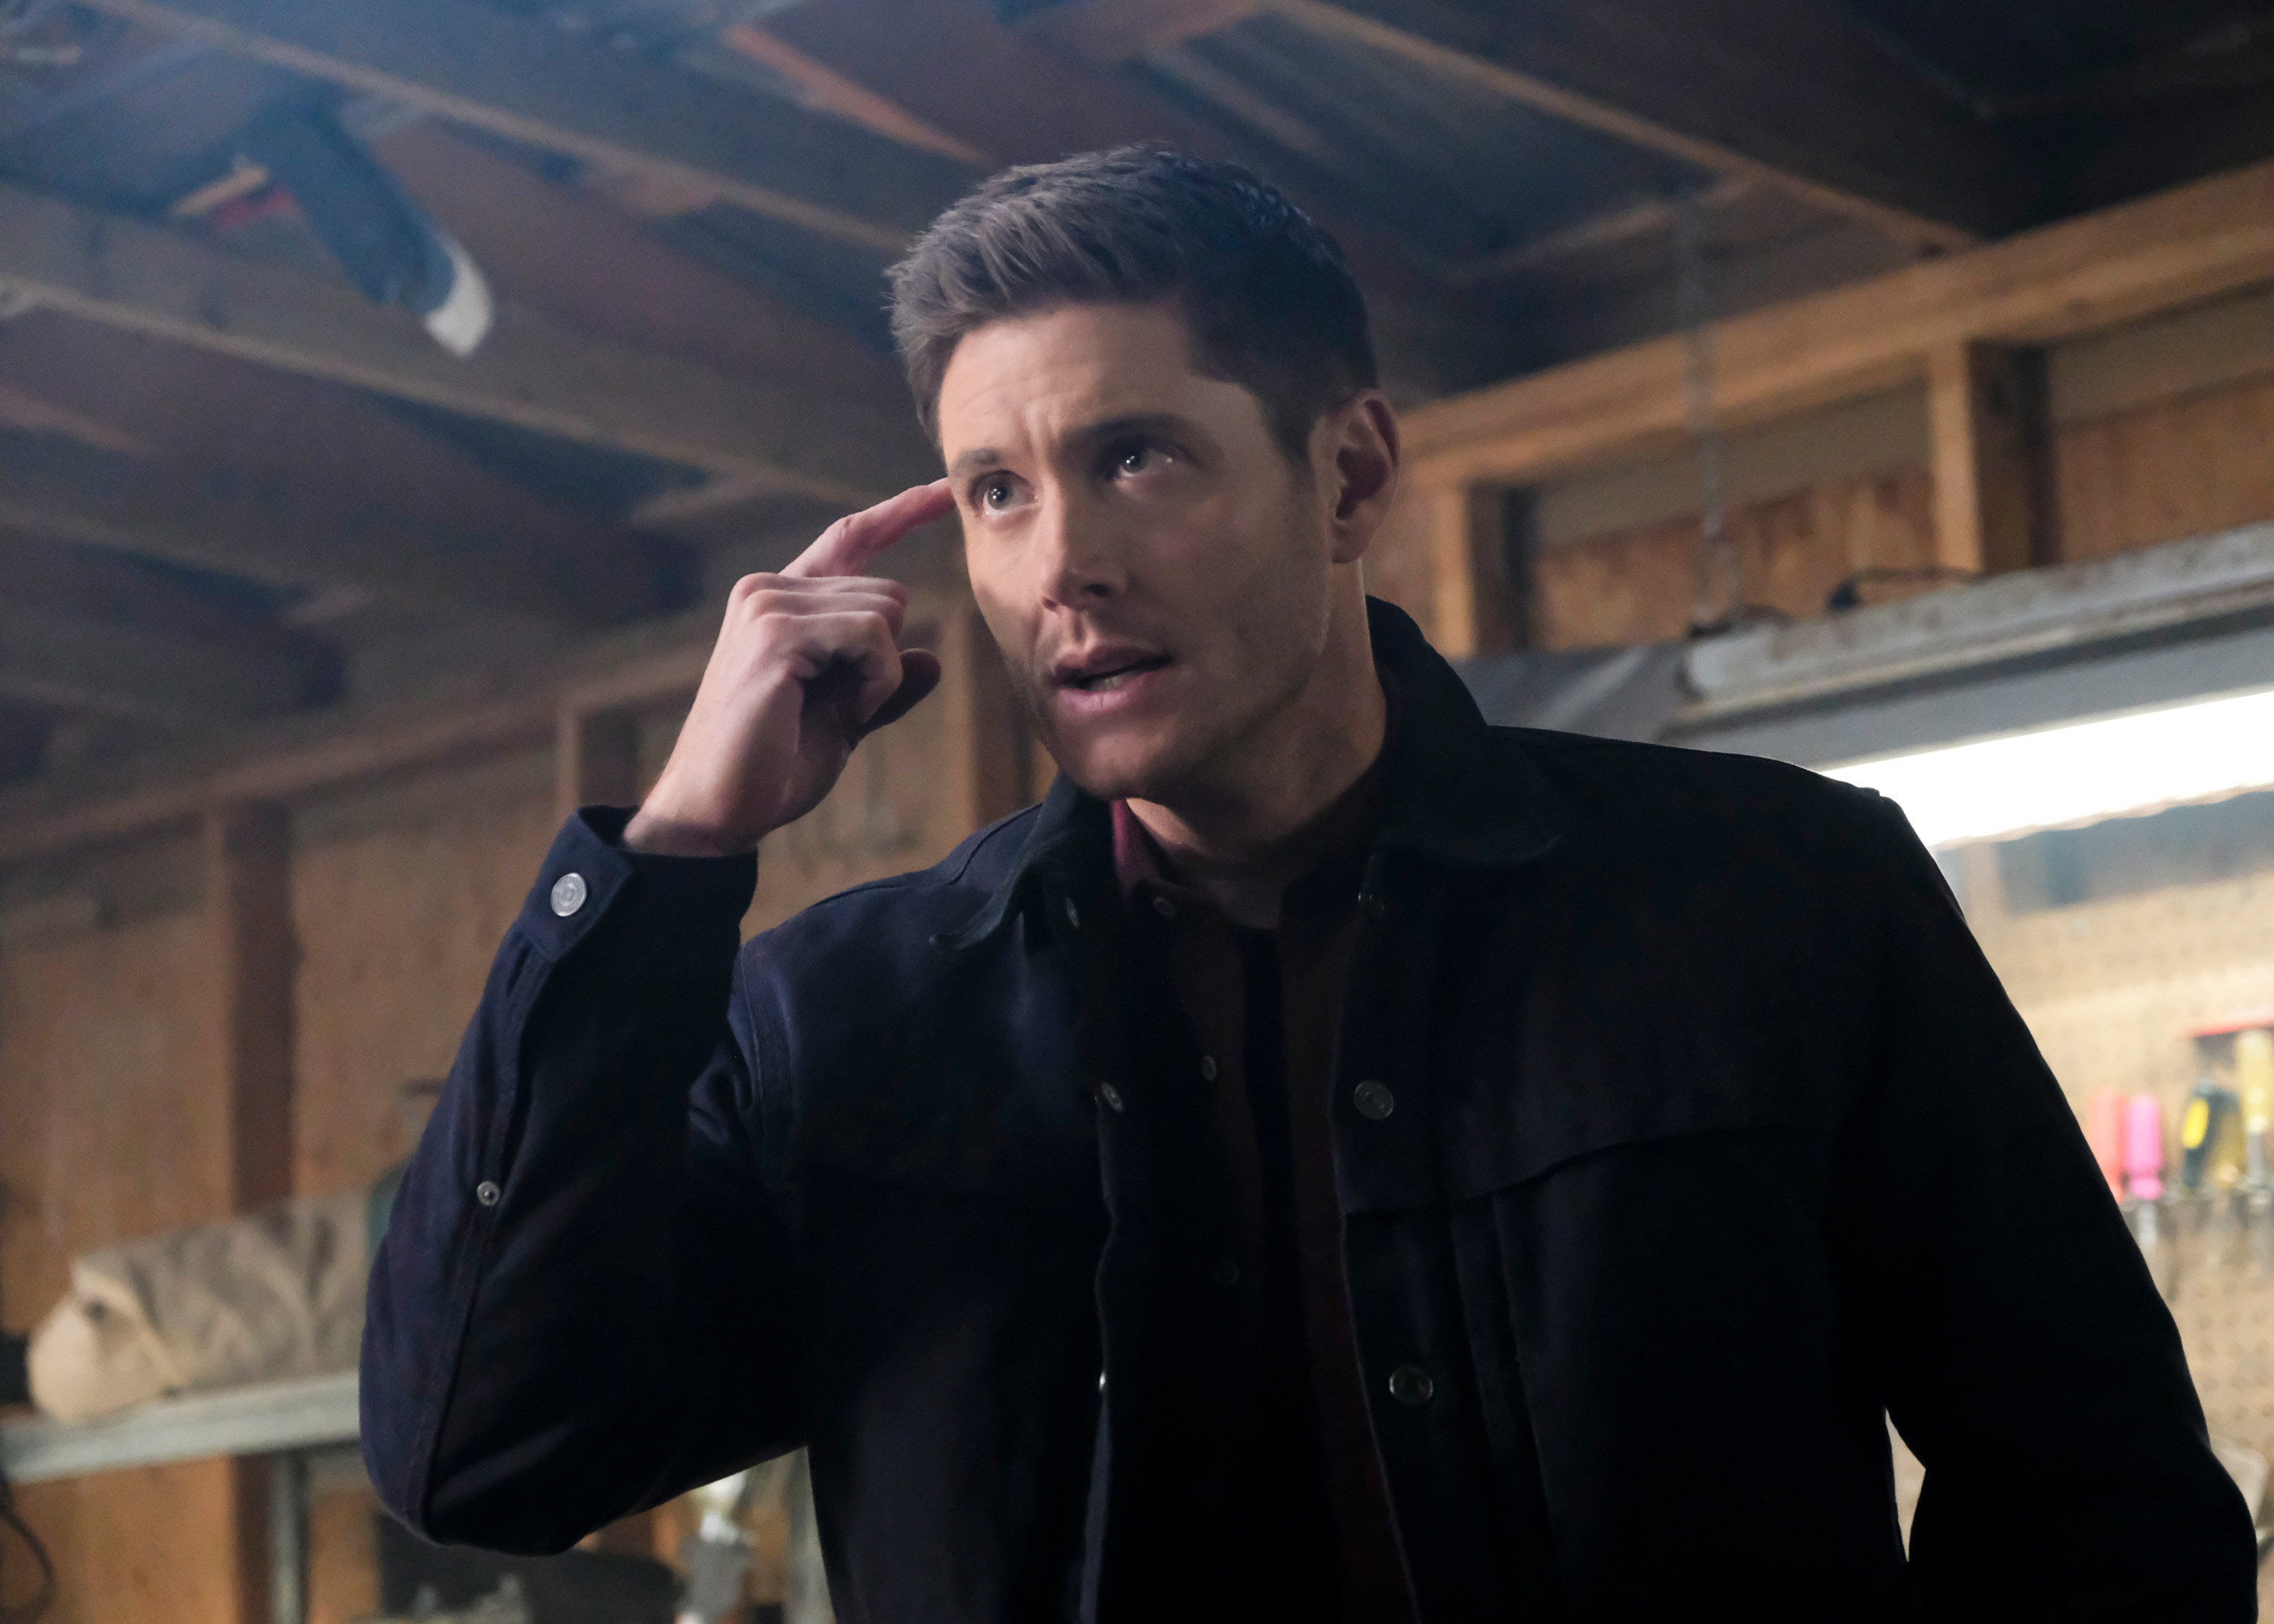 Dean pointing to his head